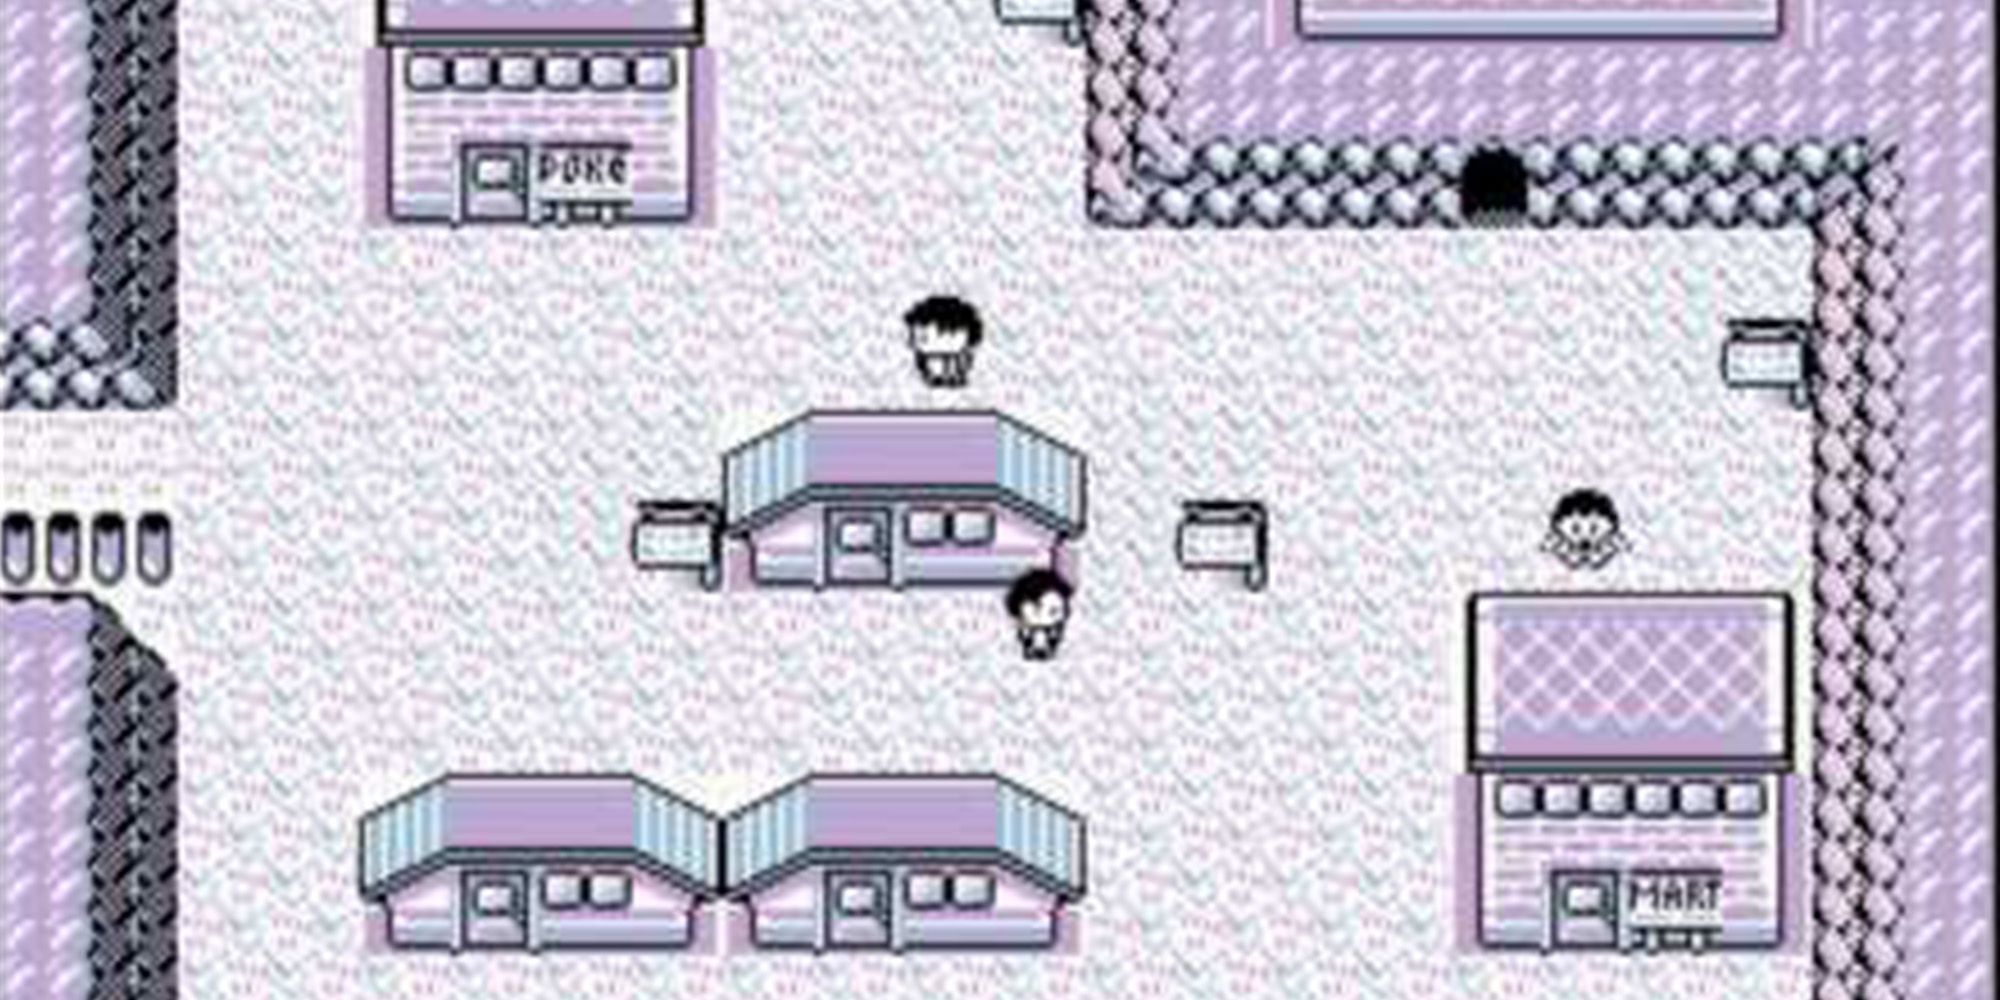 Lavender Town from Pokemon Red & Blue.